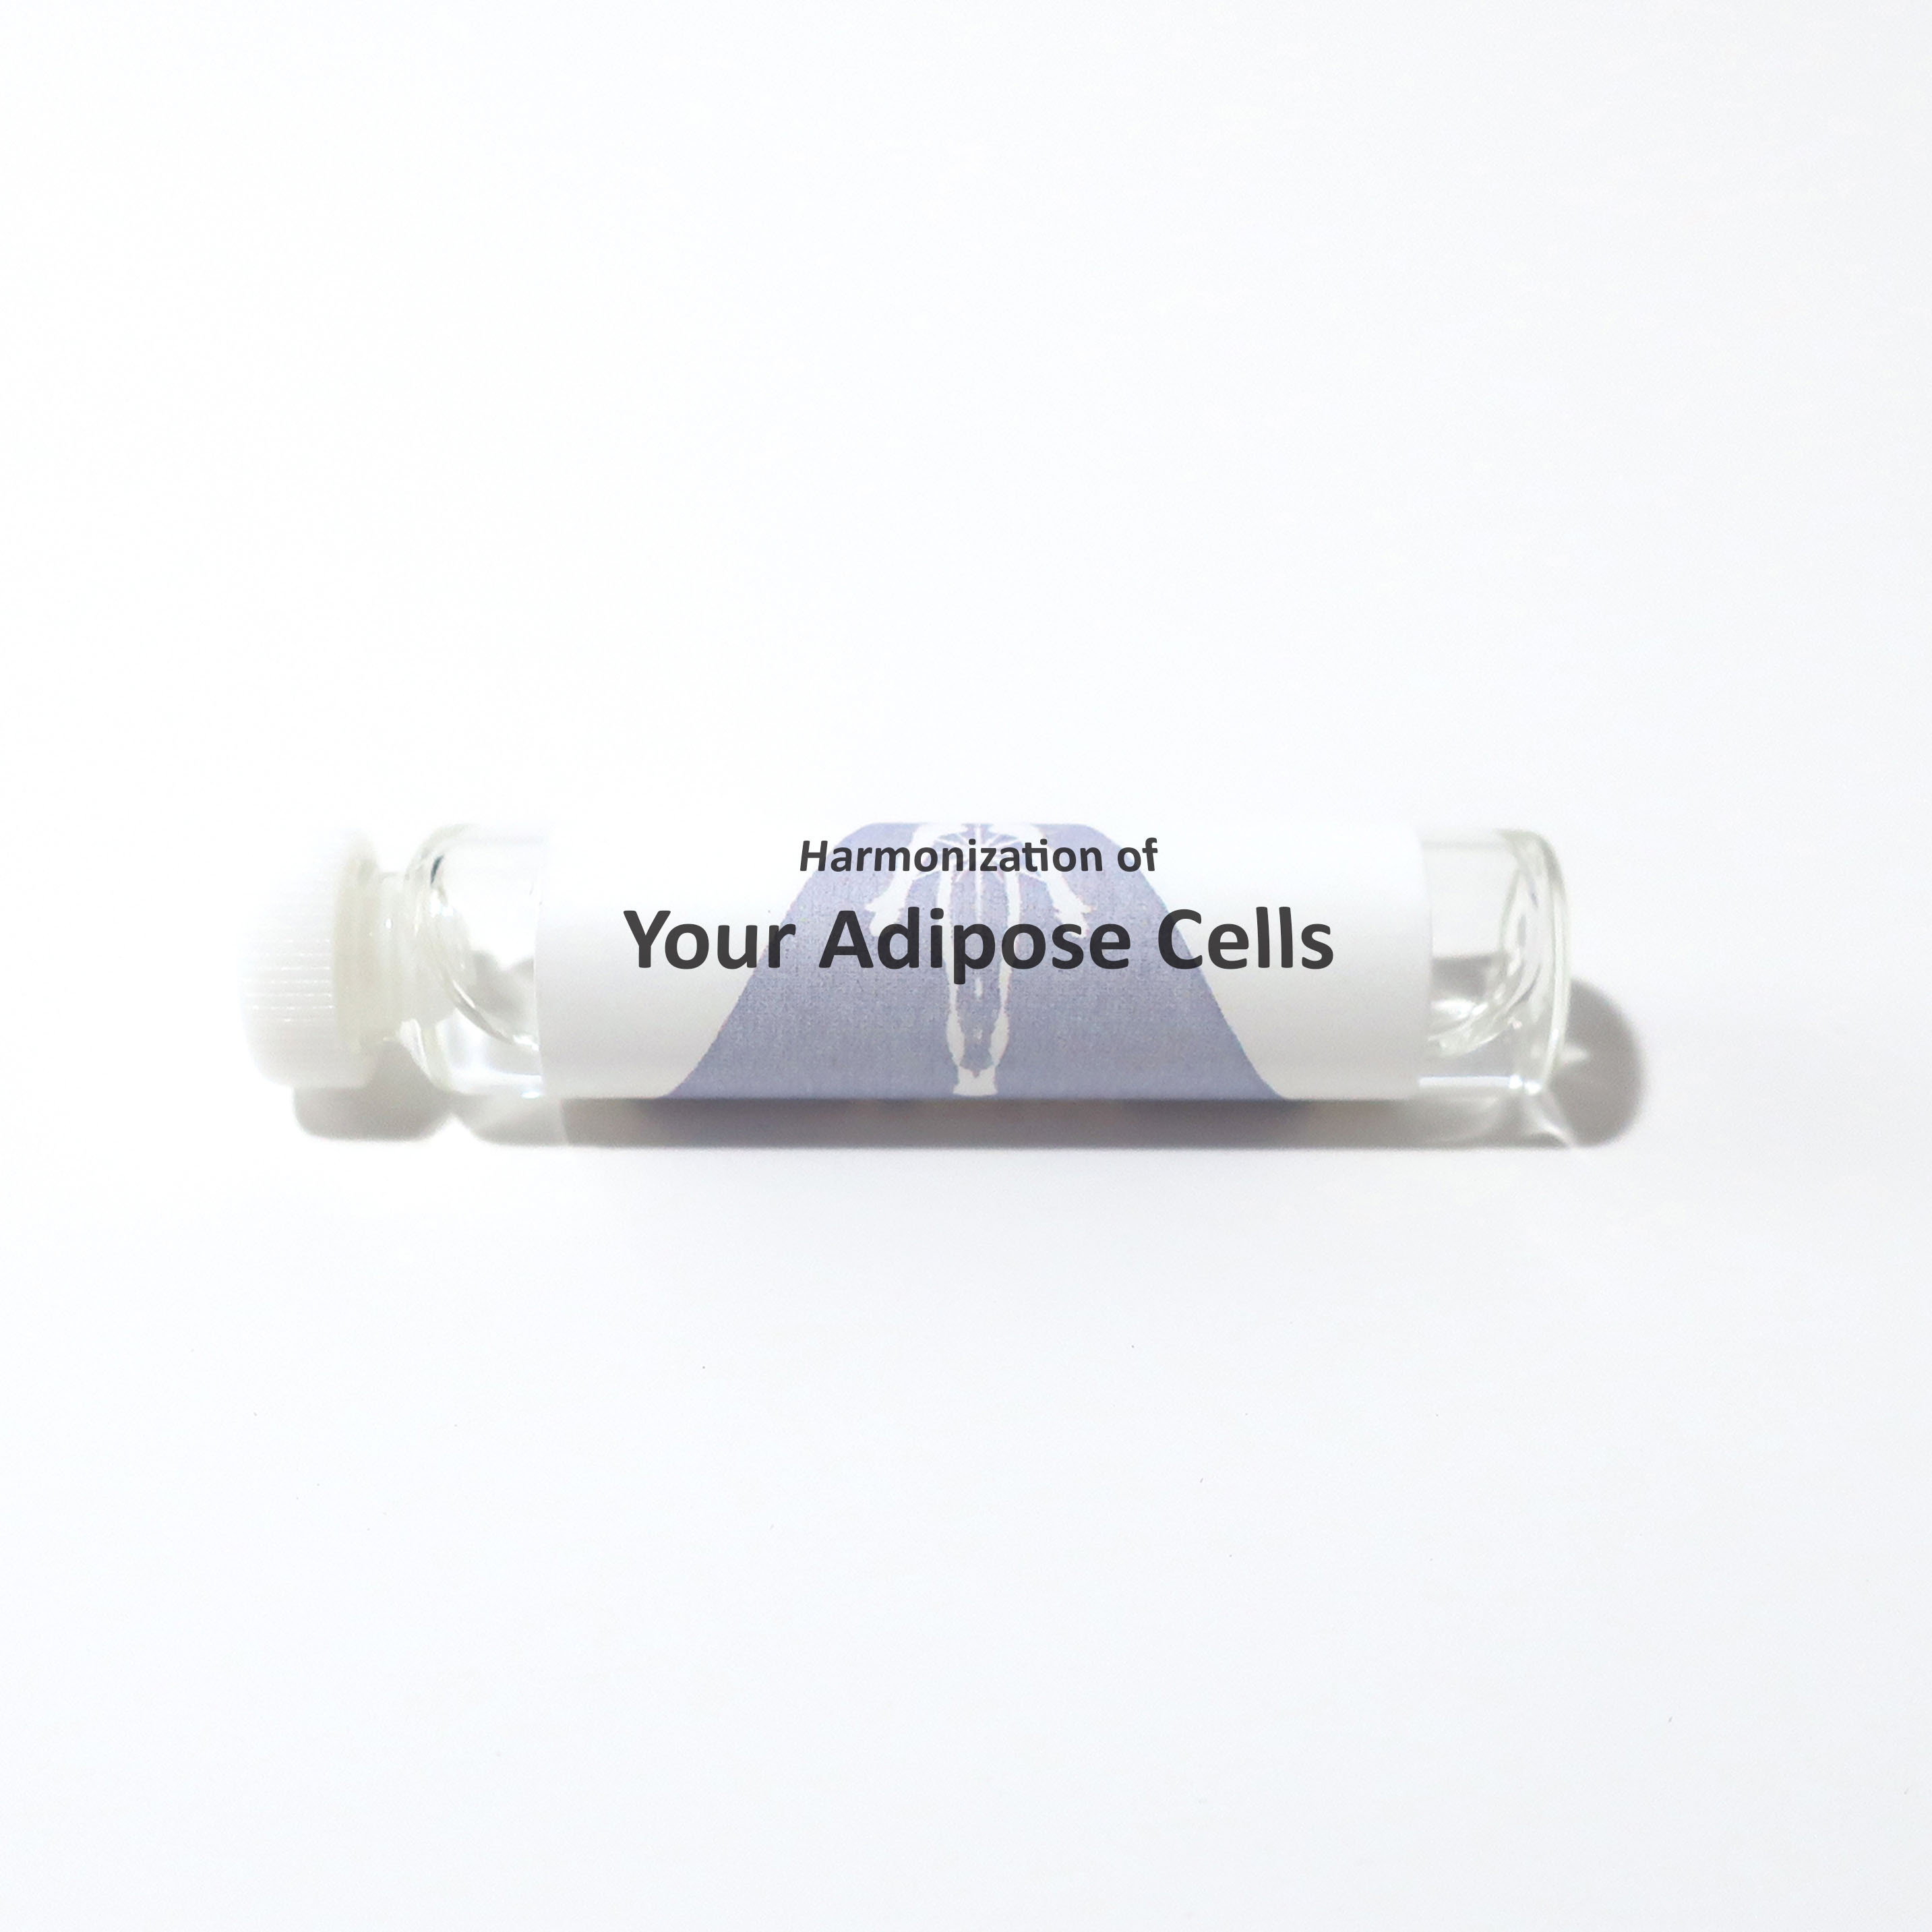 Your Adipose Cells